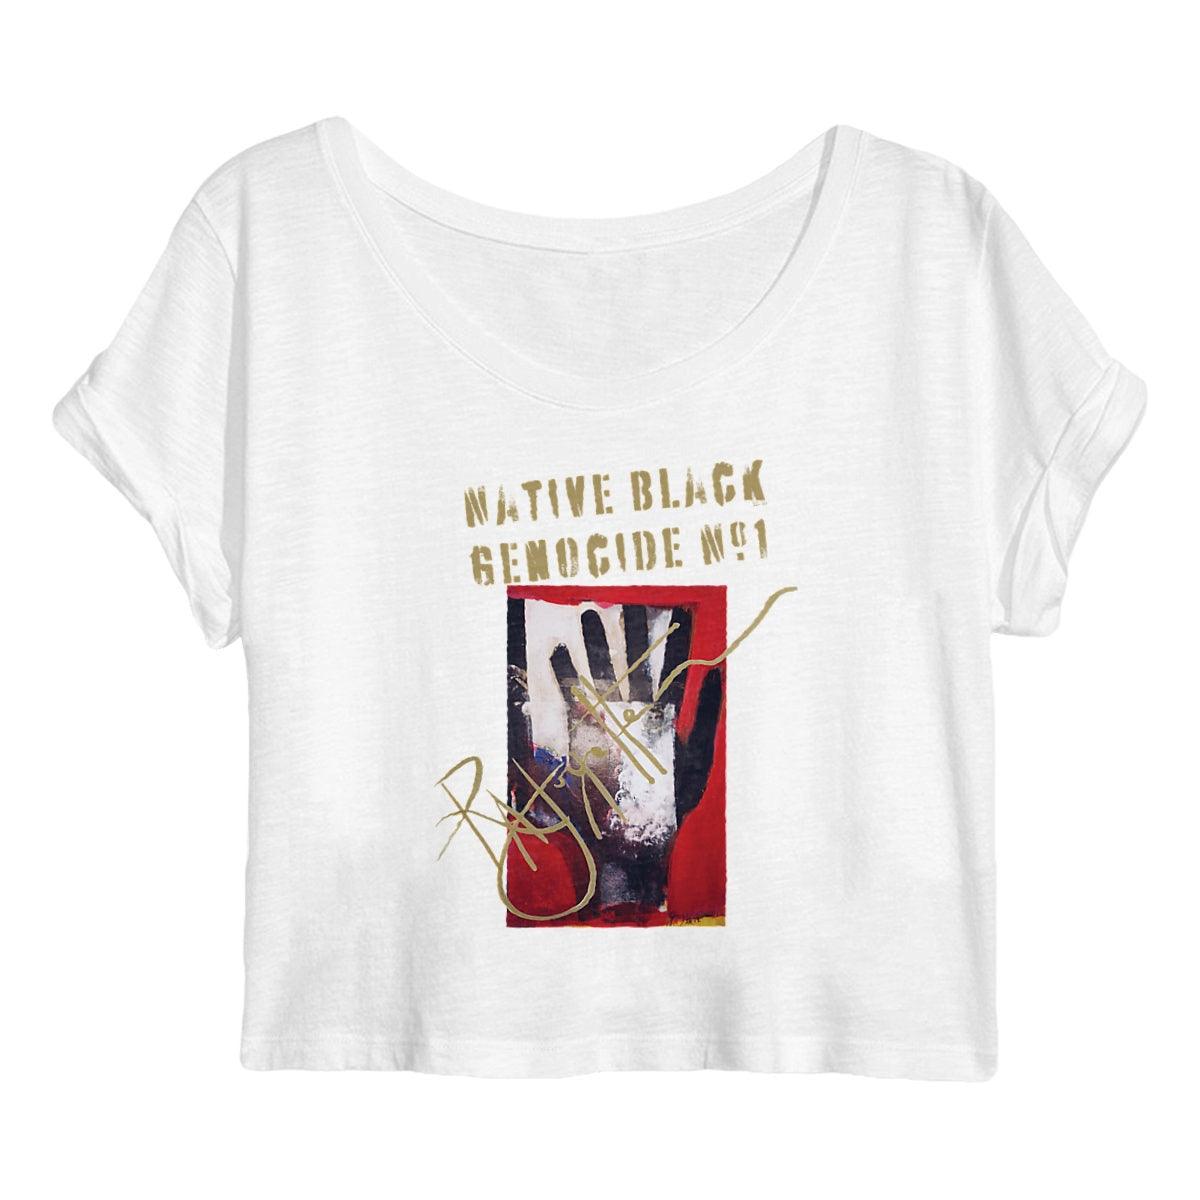 Native Black Genocide #1 Premium Women's Crop Top, made from 100% organic cotton, designed by Tree of Life Art, eco-conscious and stylish.